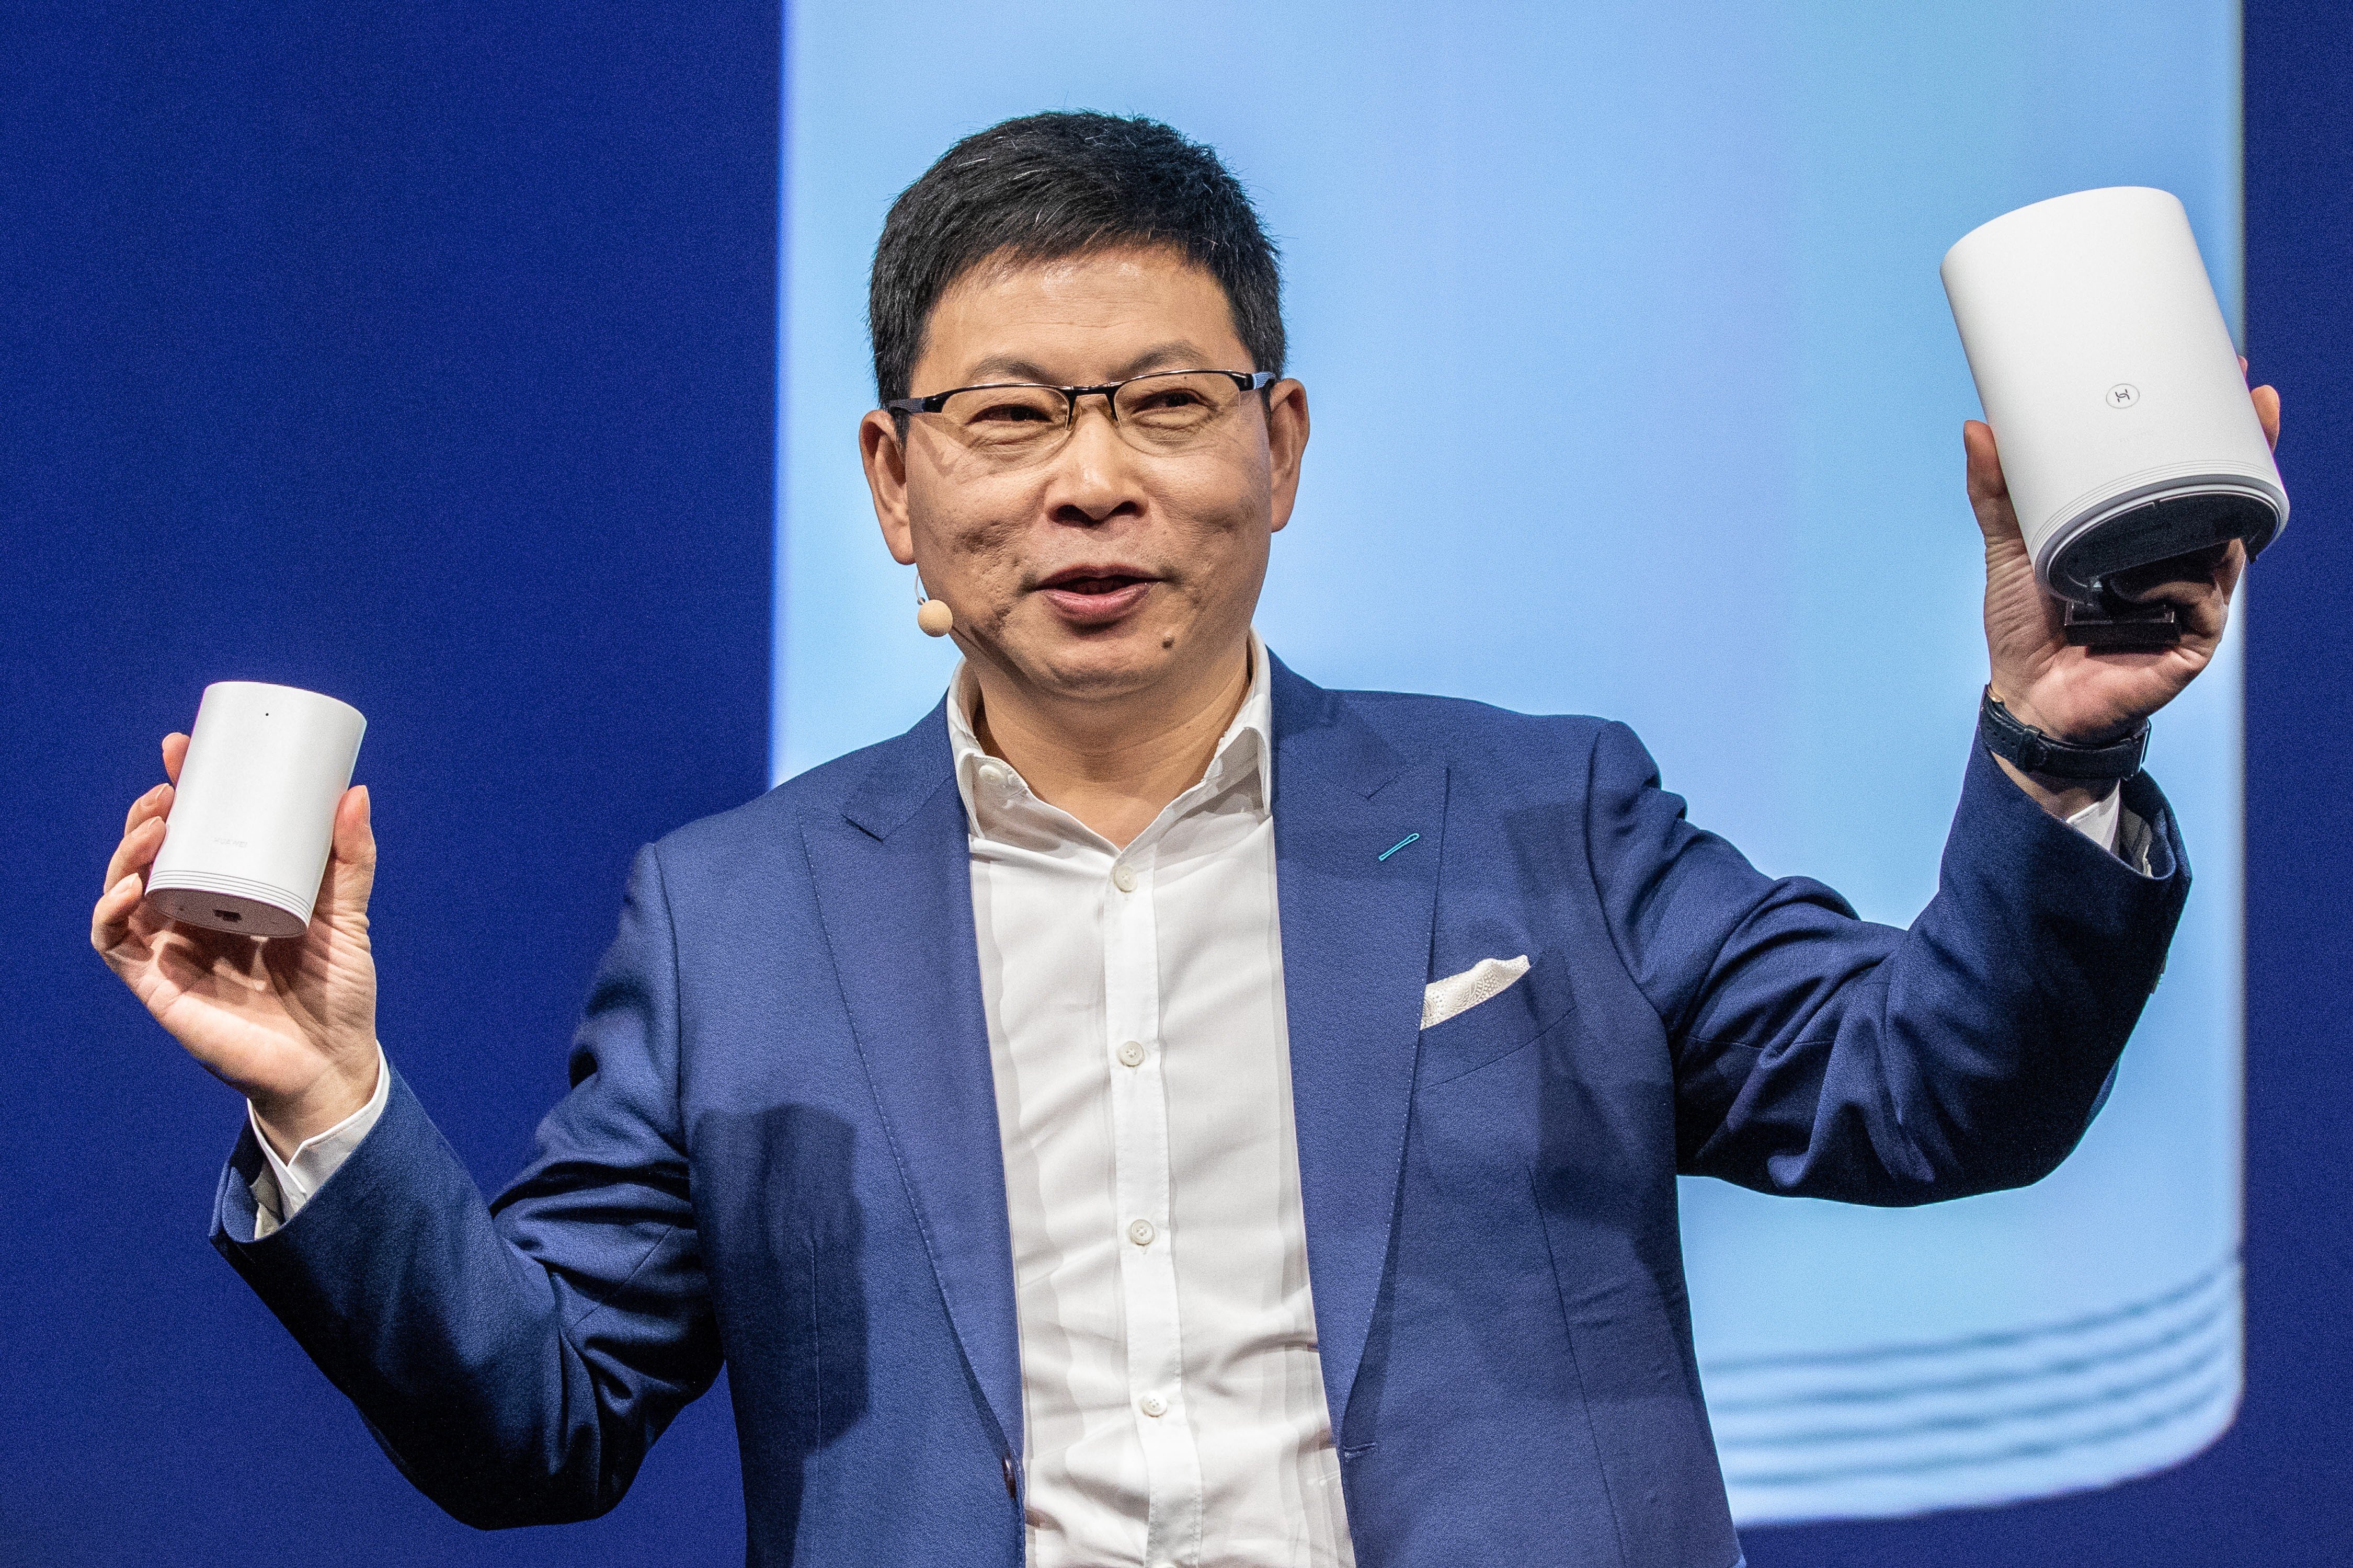 Richard Yu, CEO of Huawei Consumer Group, presents the Huawei Wi-Fi Q2 Pro, at the Internationale Funkaustellung Berlin consumer electronics fair on September 6, 2019. Photo: EPA-EFE